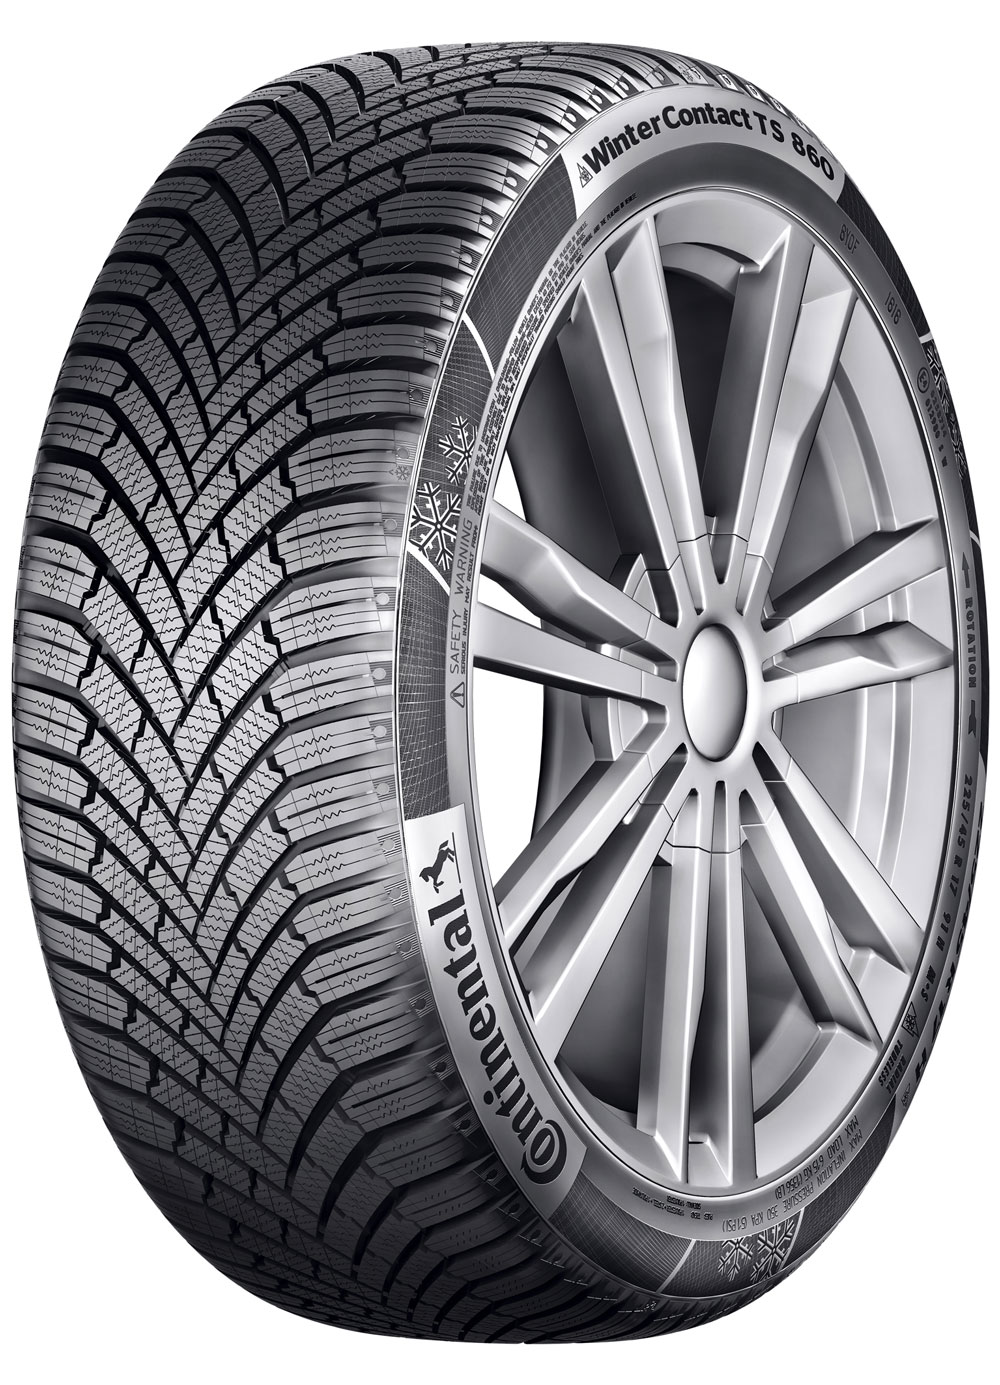 Anvelopa Iarna Continental Winter Contact Ts860 195/45R16 80T